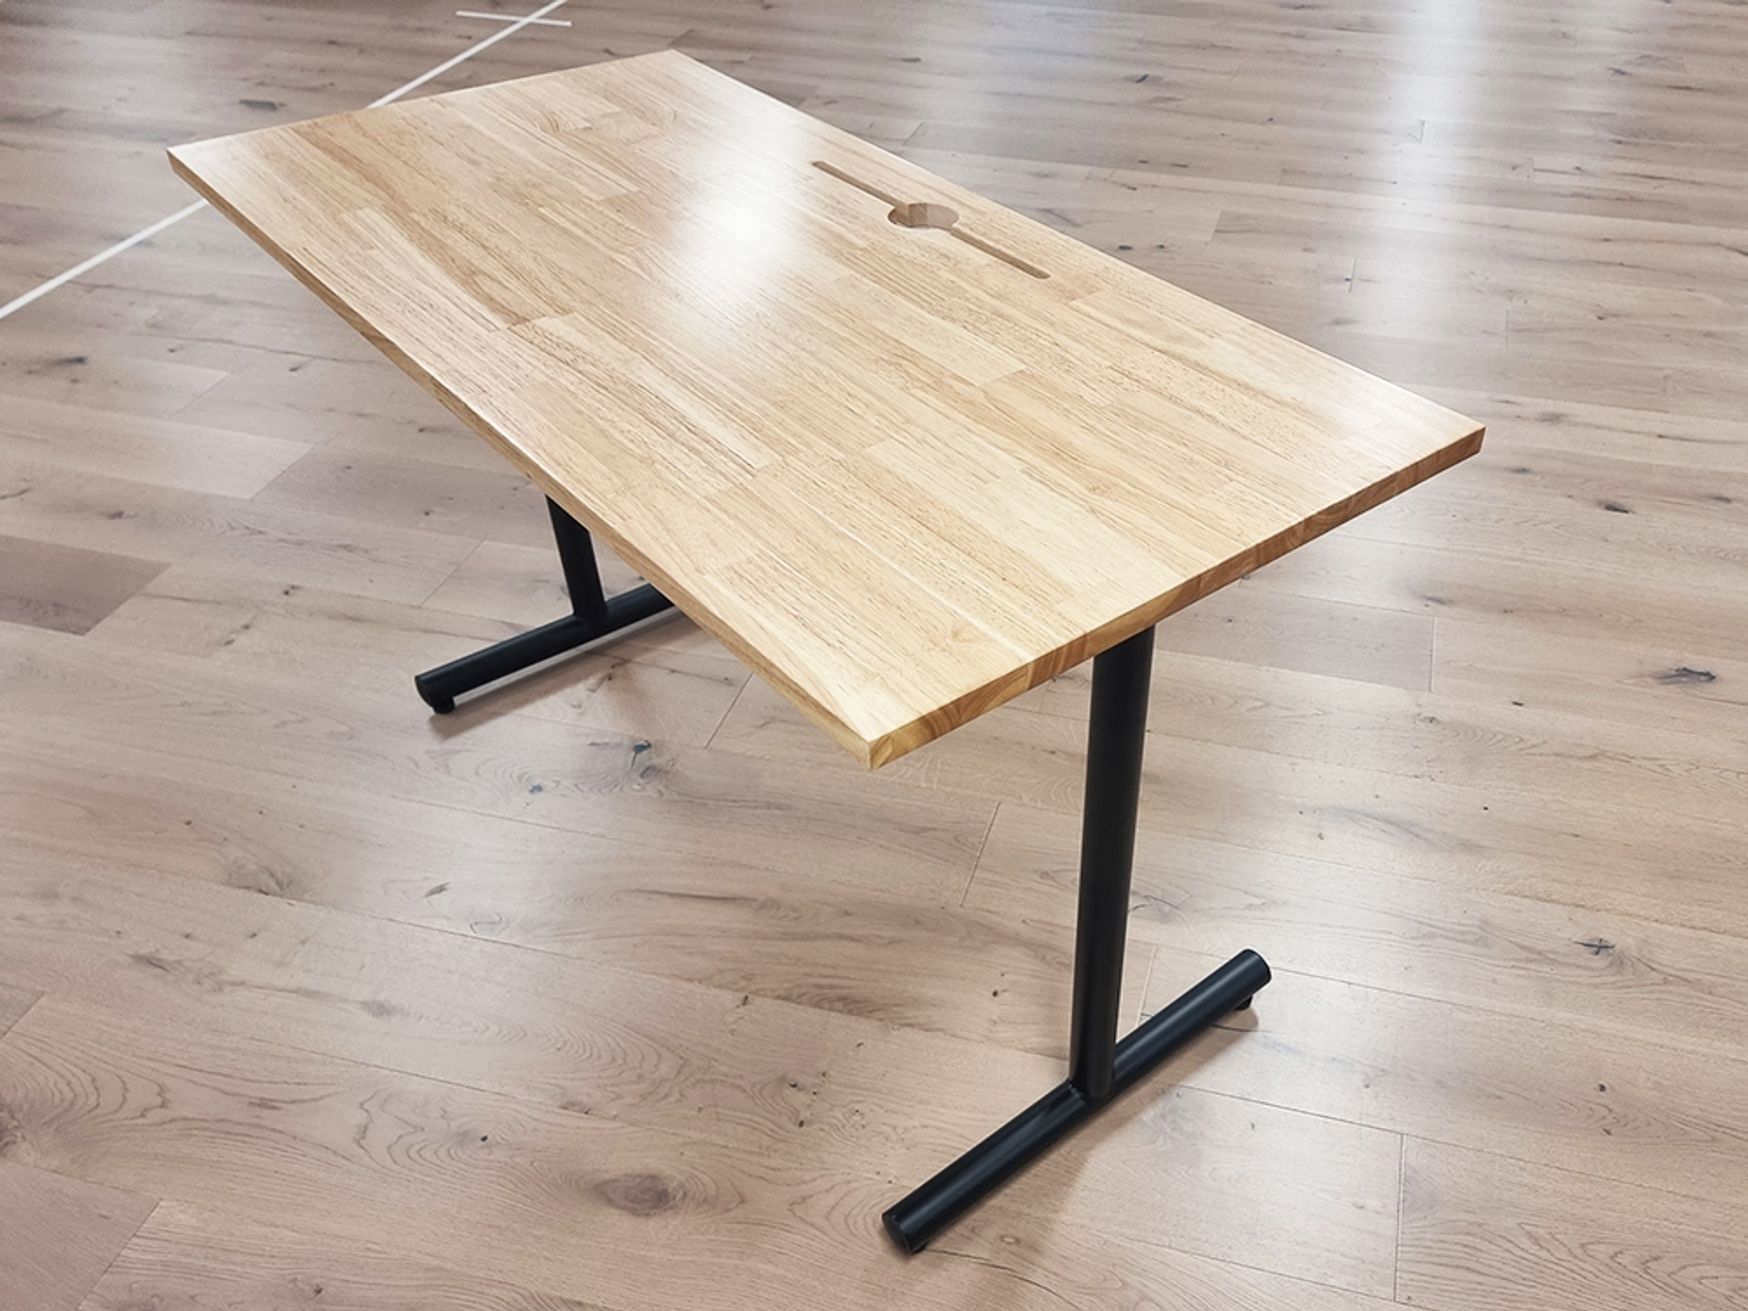 Used 1220mm Wooden Desks with 'T' Legs